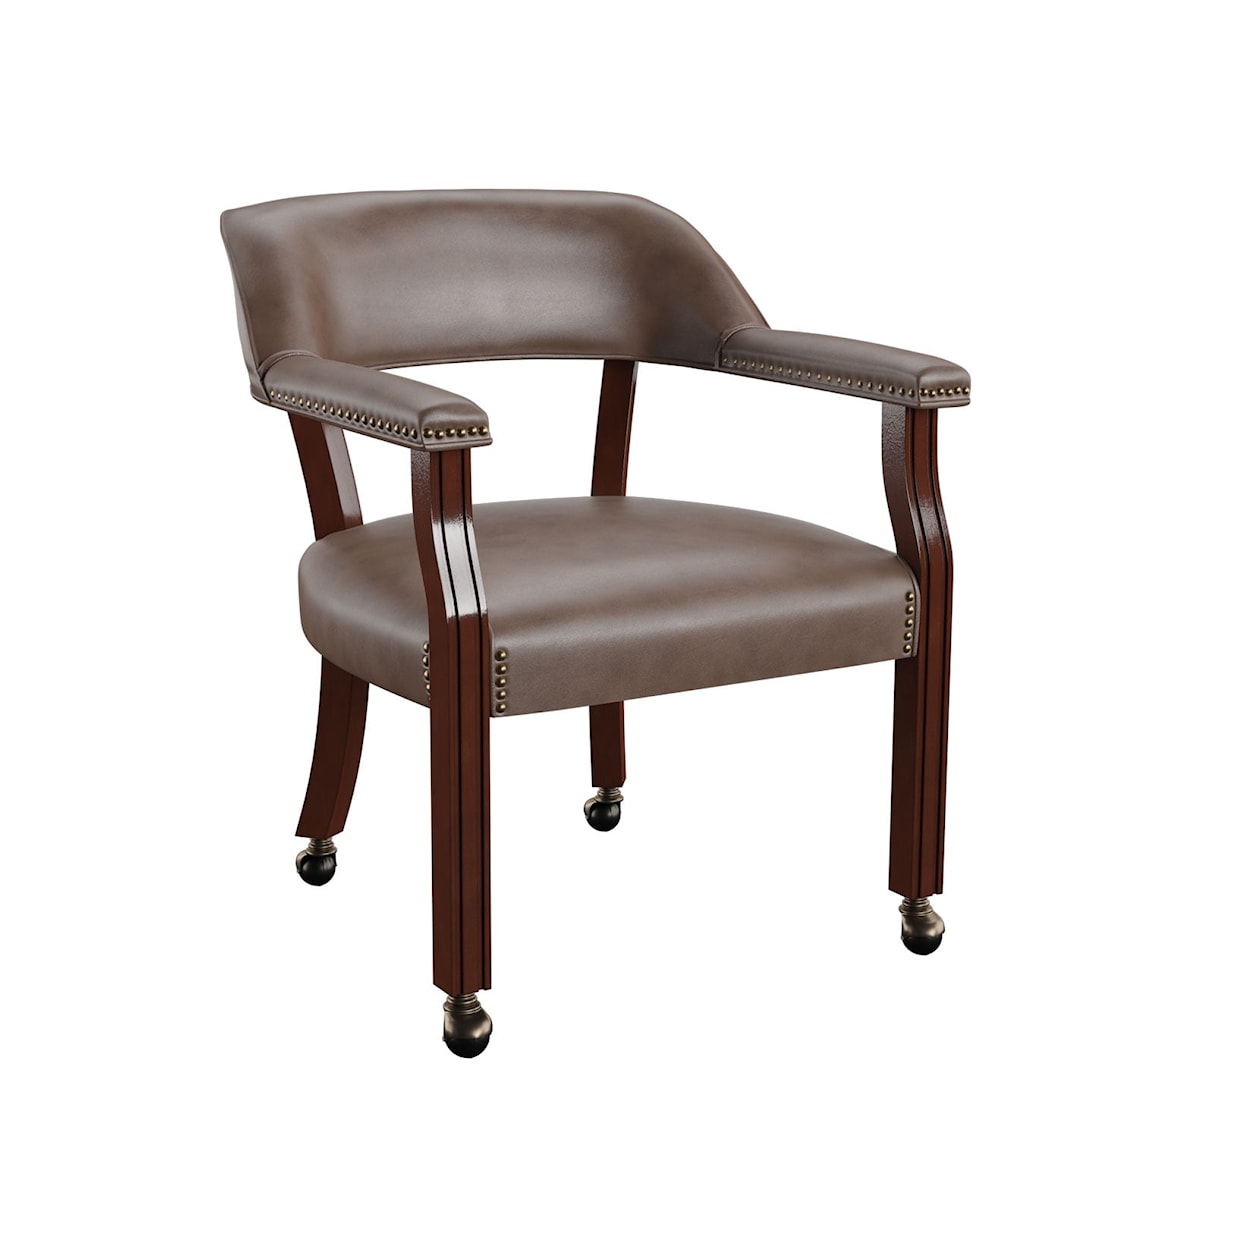 Prime Tournament Tournament Arm Chair with Casters